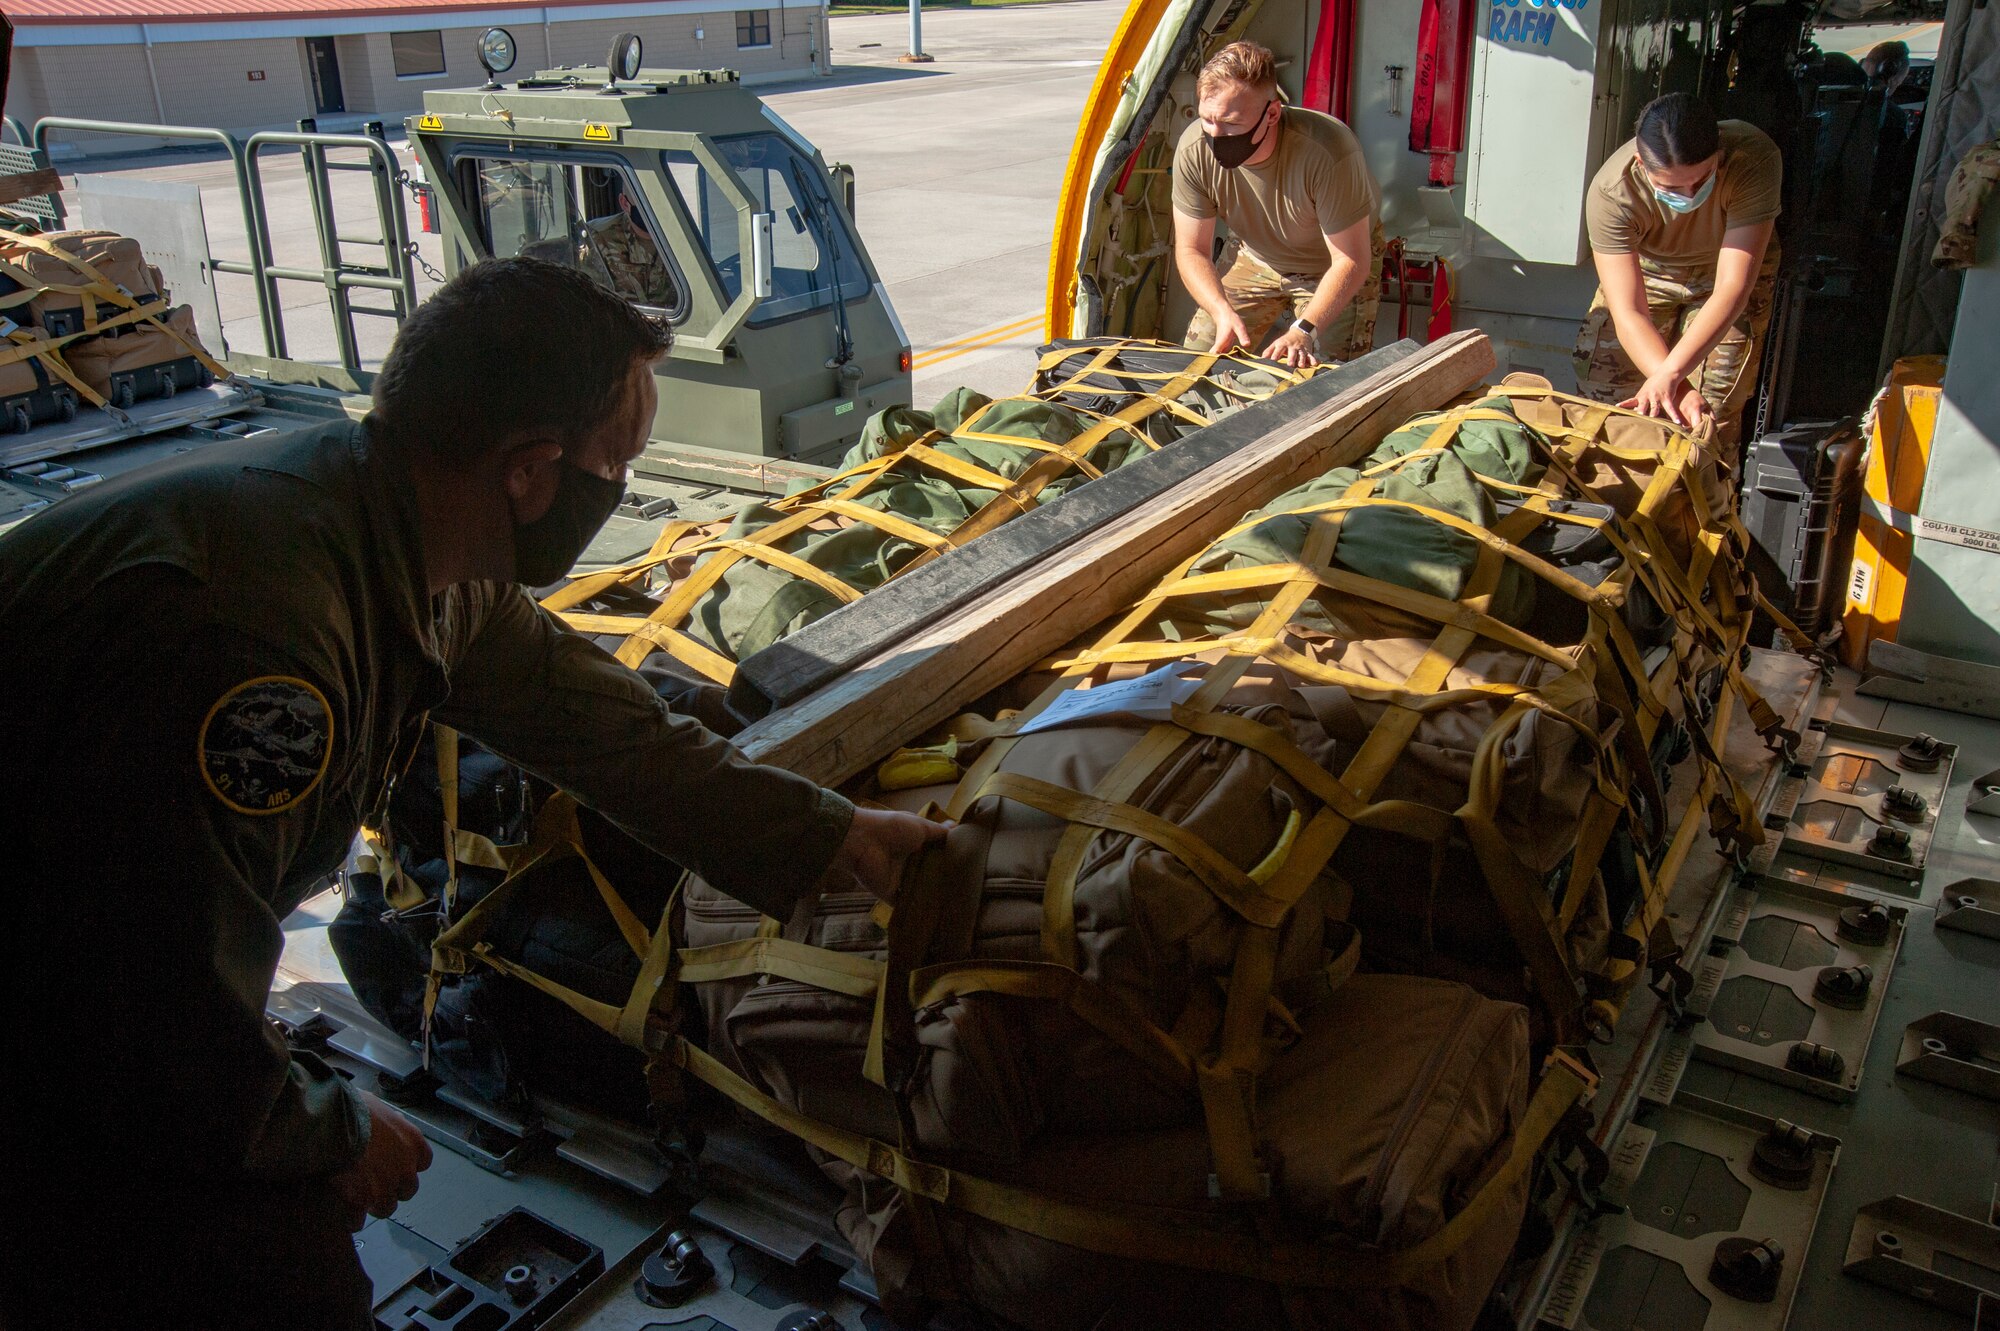 Airmen from the 91st Air Refueling Squadron roll cargo for a deployment onto a KC-135 Stratotanker aircraft, April 9, 2021, at MacDill Air Force Base, Fla. The cargo is loading and then secured on rollers, making it easy to offload when arriving at Al Udeid Air Base, Qatar. (U.S. Air Force photo by Airman 1st Class David D. McLoney)